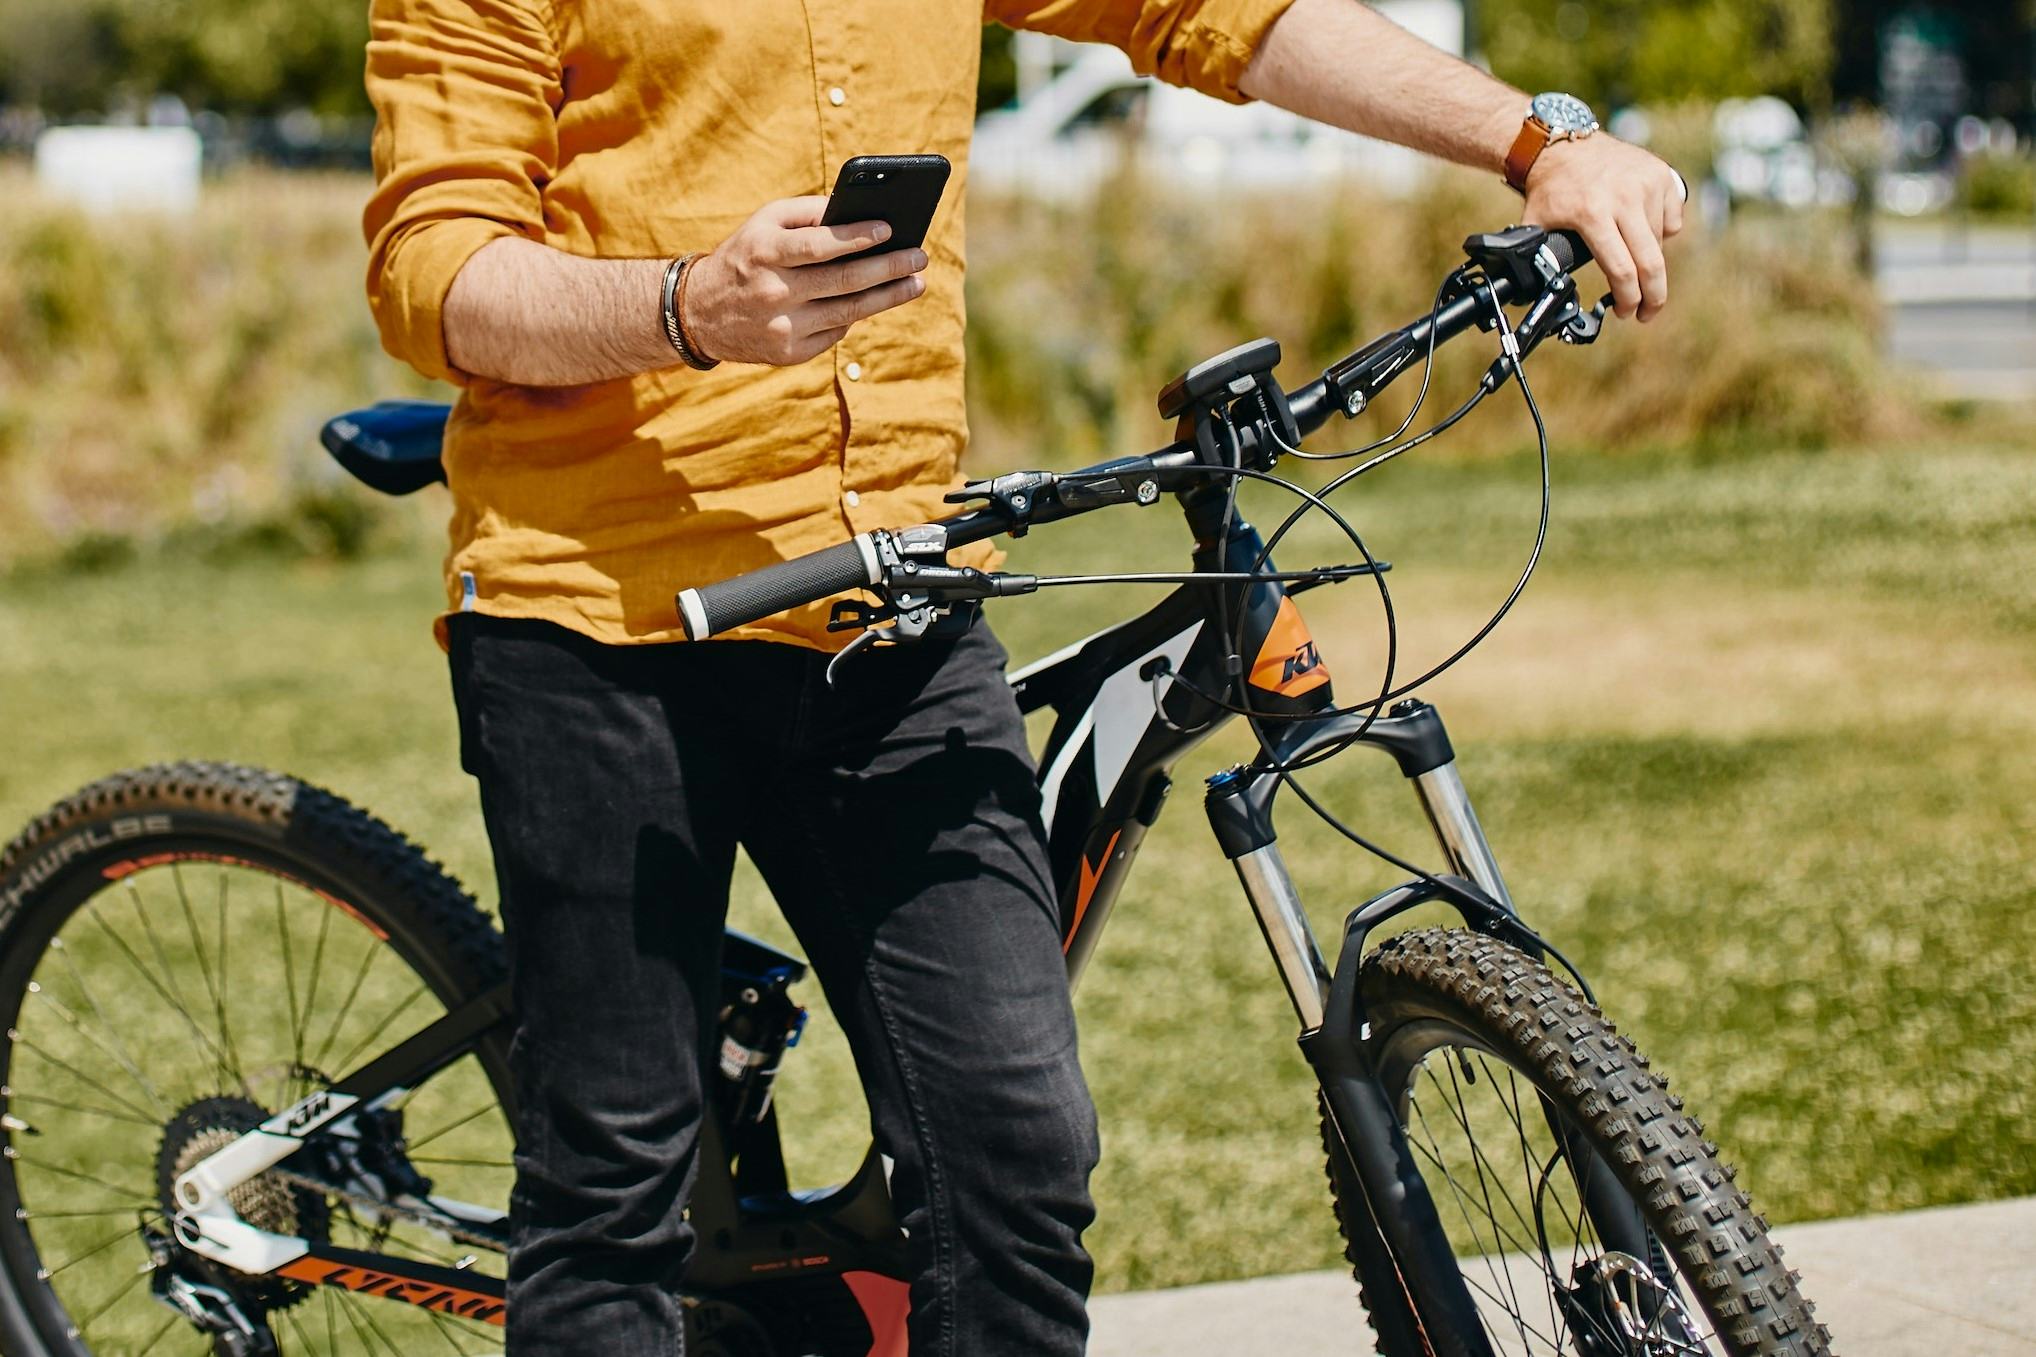 With the patented WinkNav navigation system from Velco, the smart handlebars take the user to their destination safely with a fast and bike-friendly route, guided by the light blocks integrated into the handlebars. - Photo Velco